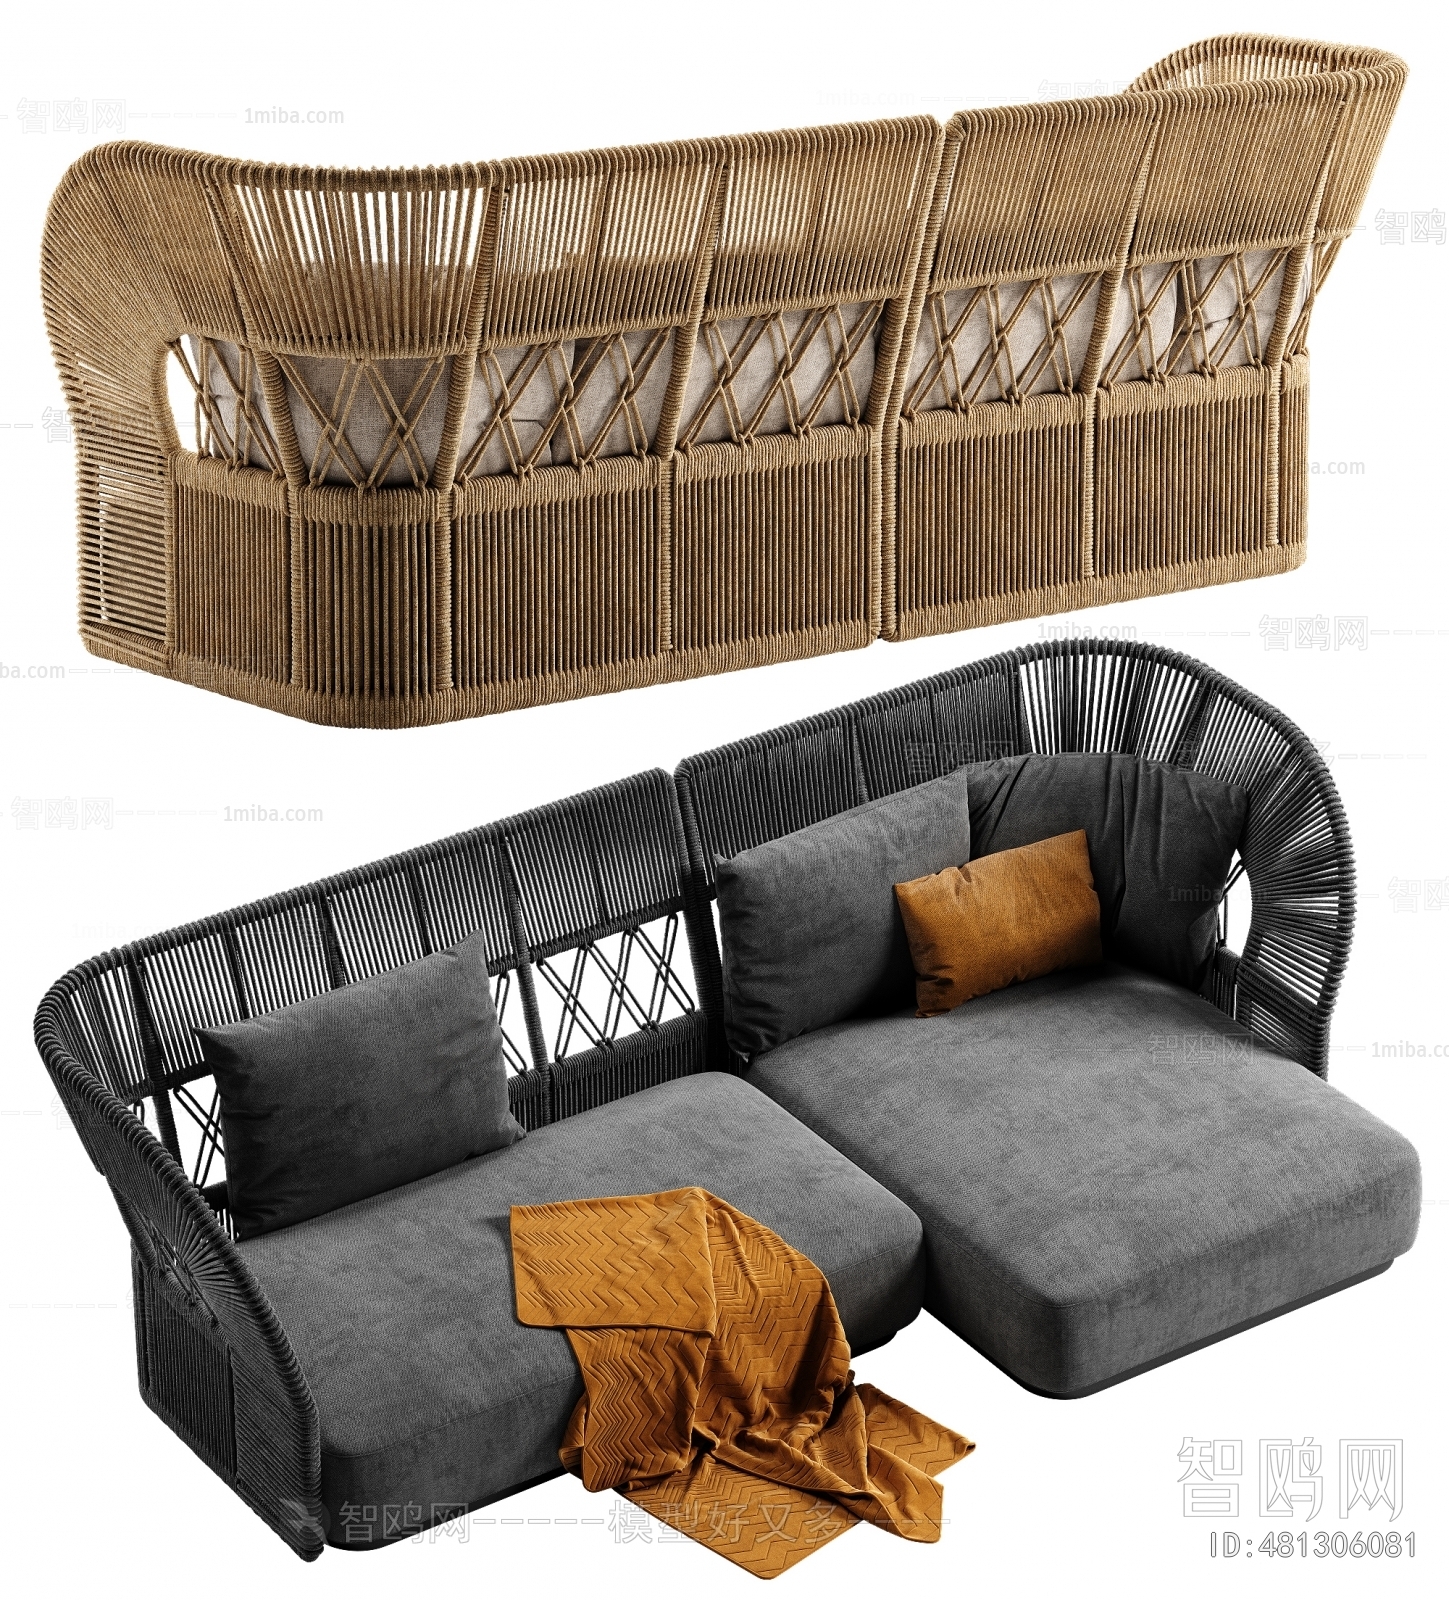 Southeast Asian Style Outdoor Sofa